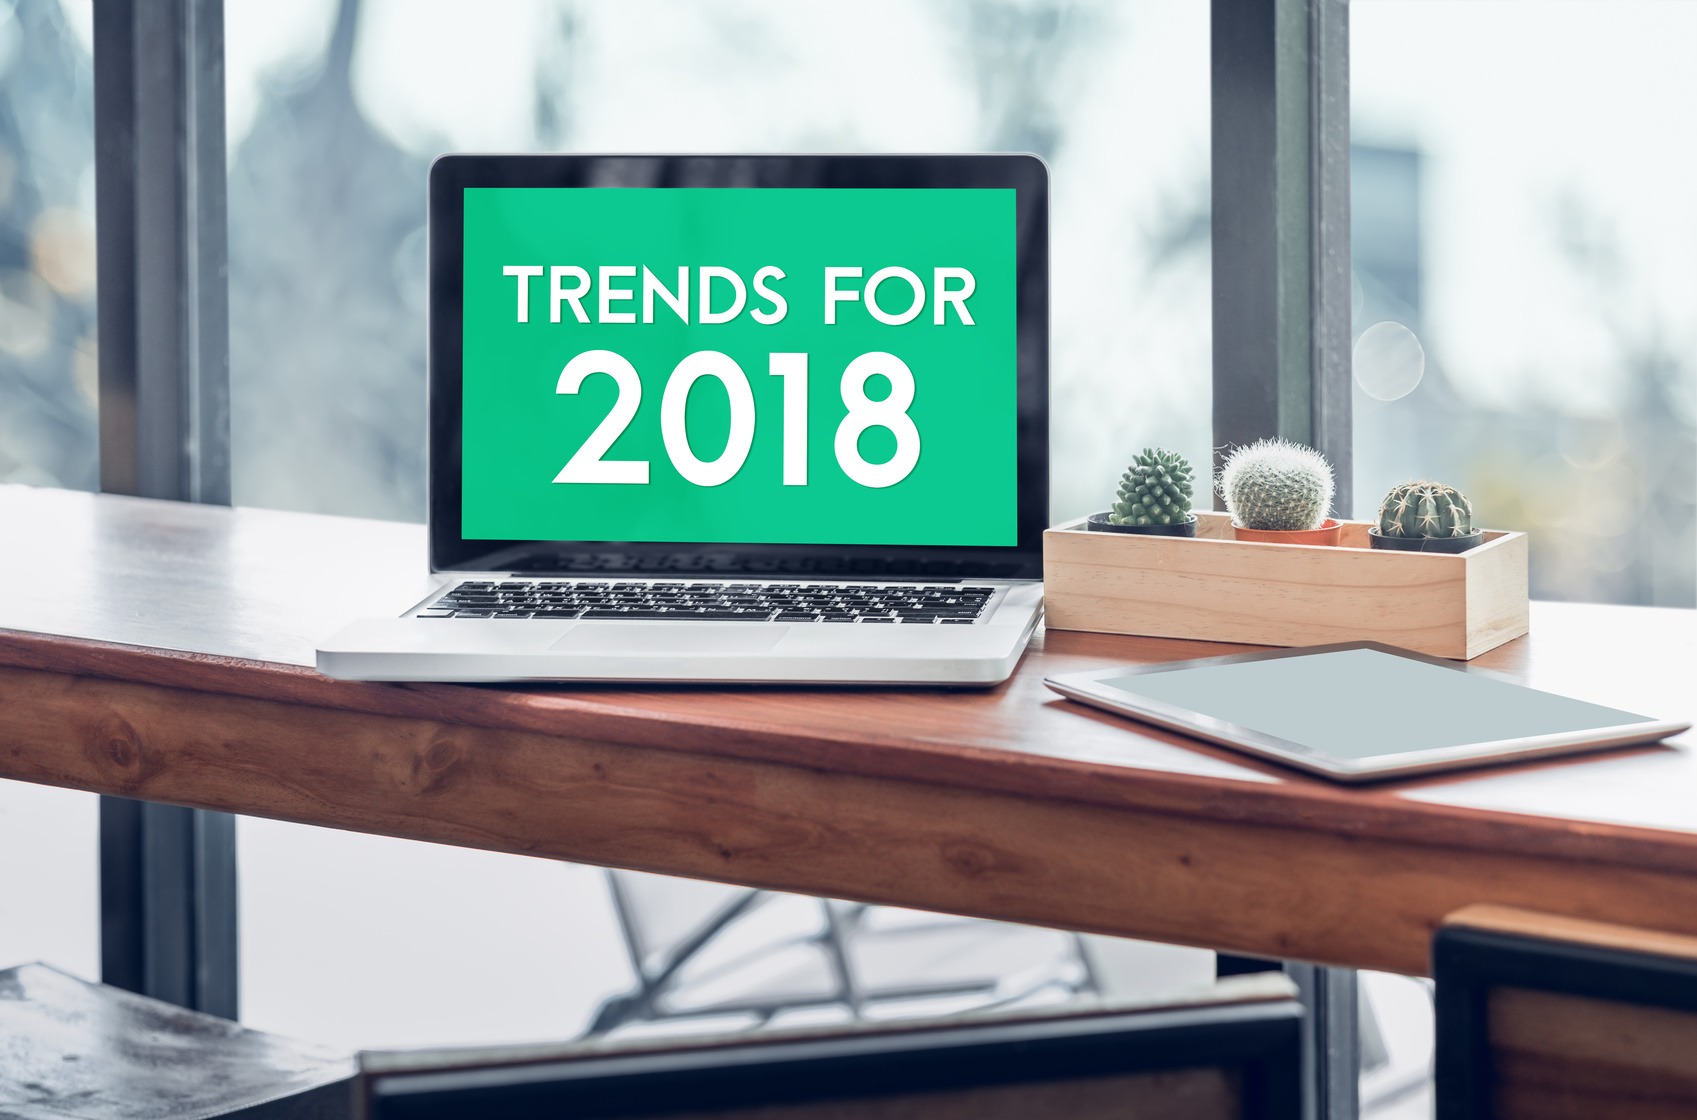 Android App Development - Trends for 2018